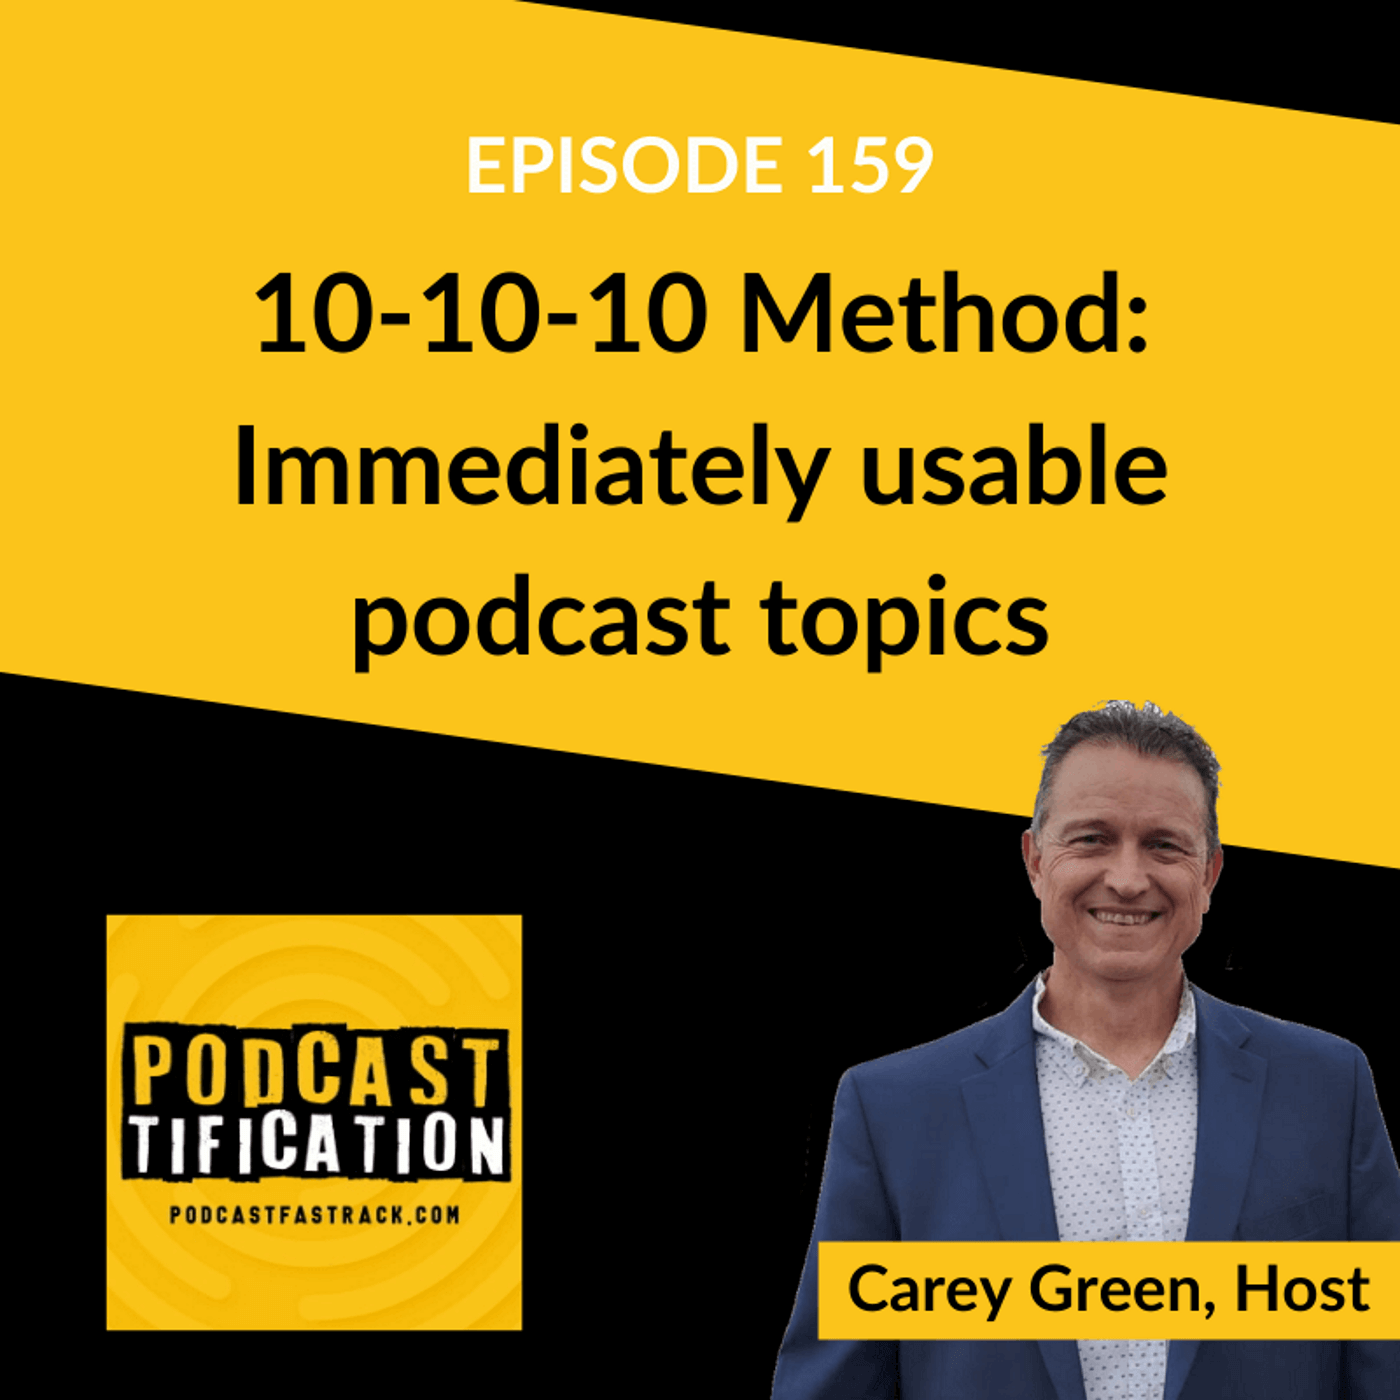 159: Discover 10 to 15 immediately usable podcast topics in just 30 minutes: The 10-10-10 method